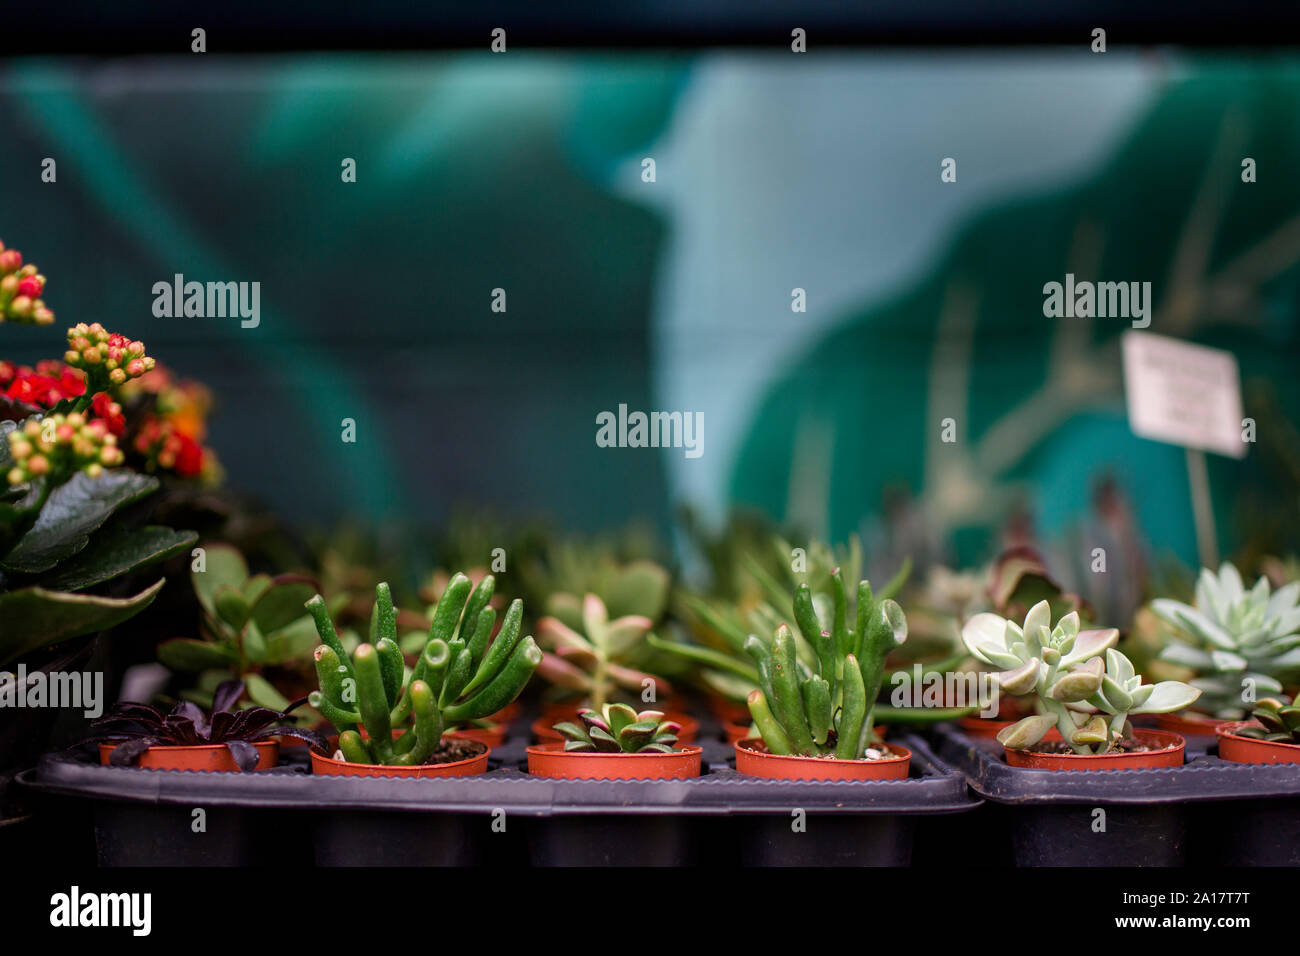 rows of tiny potted plants sit on a shelf in a garden store Stock Photo